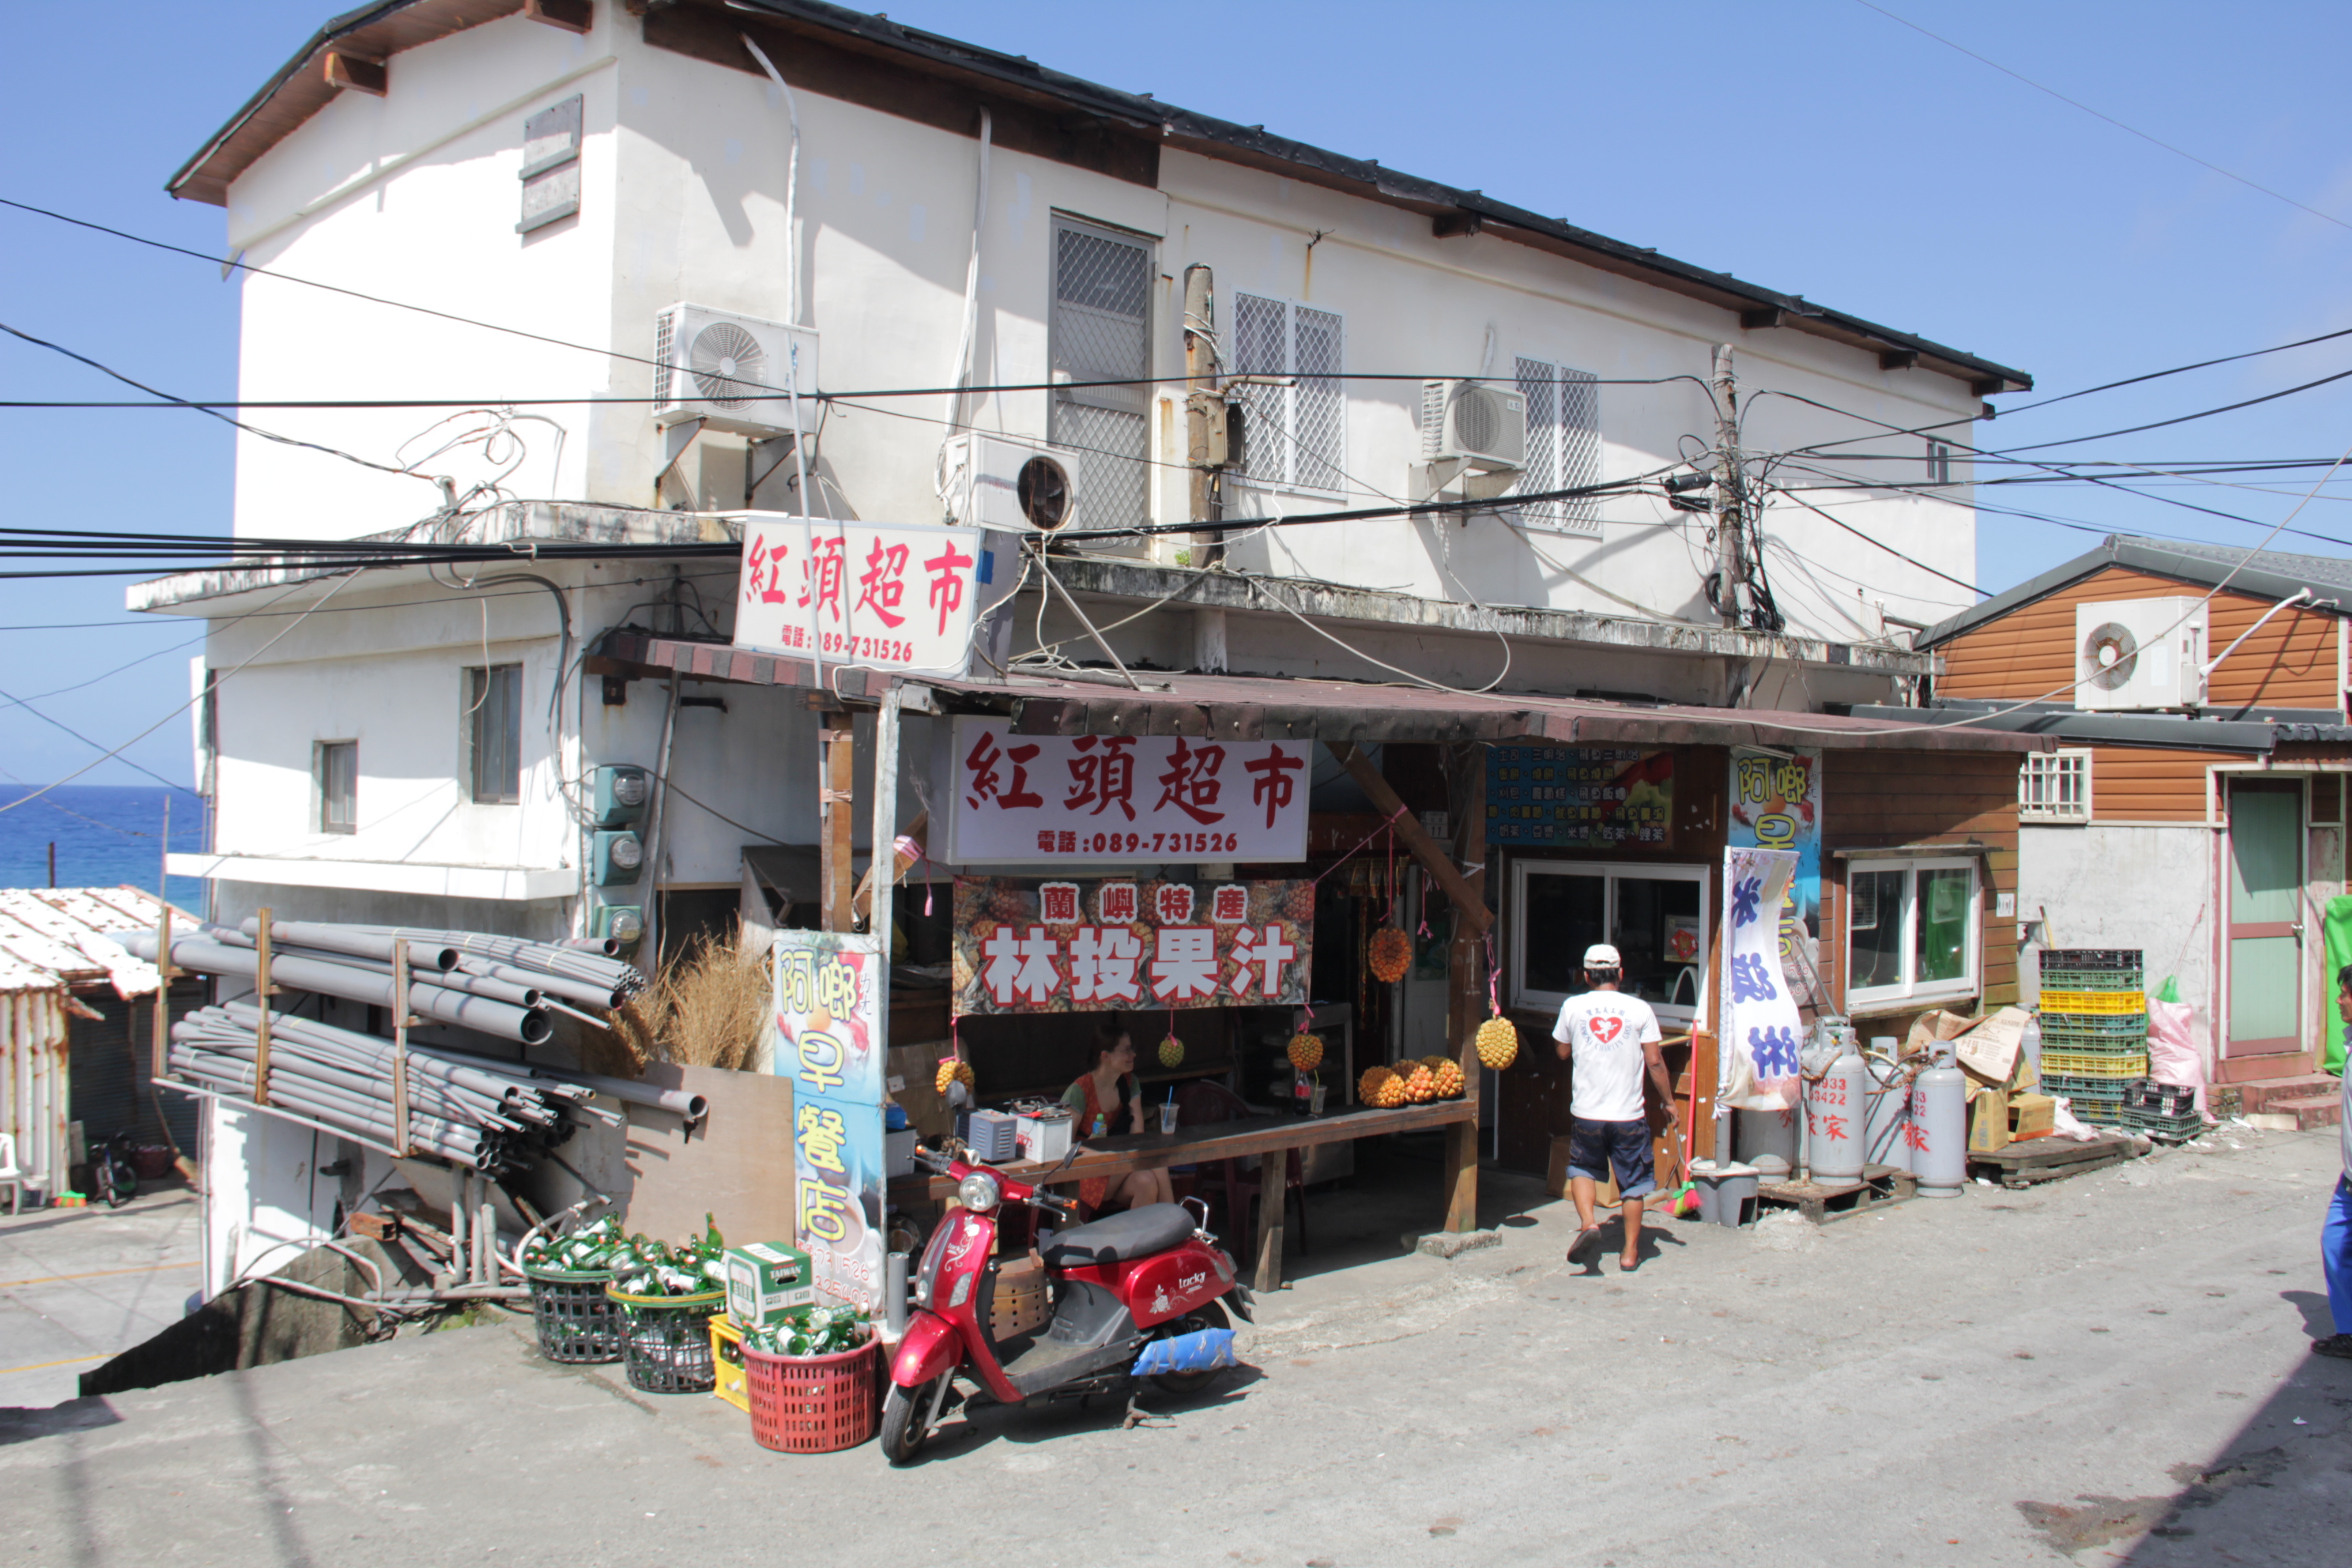 Local shop selling Orchid Island specialities, with pin apples for "lintou juice".